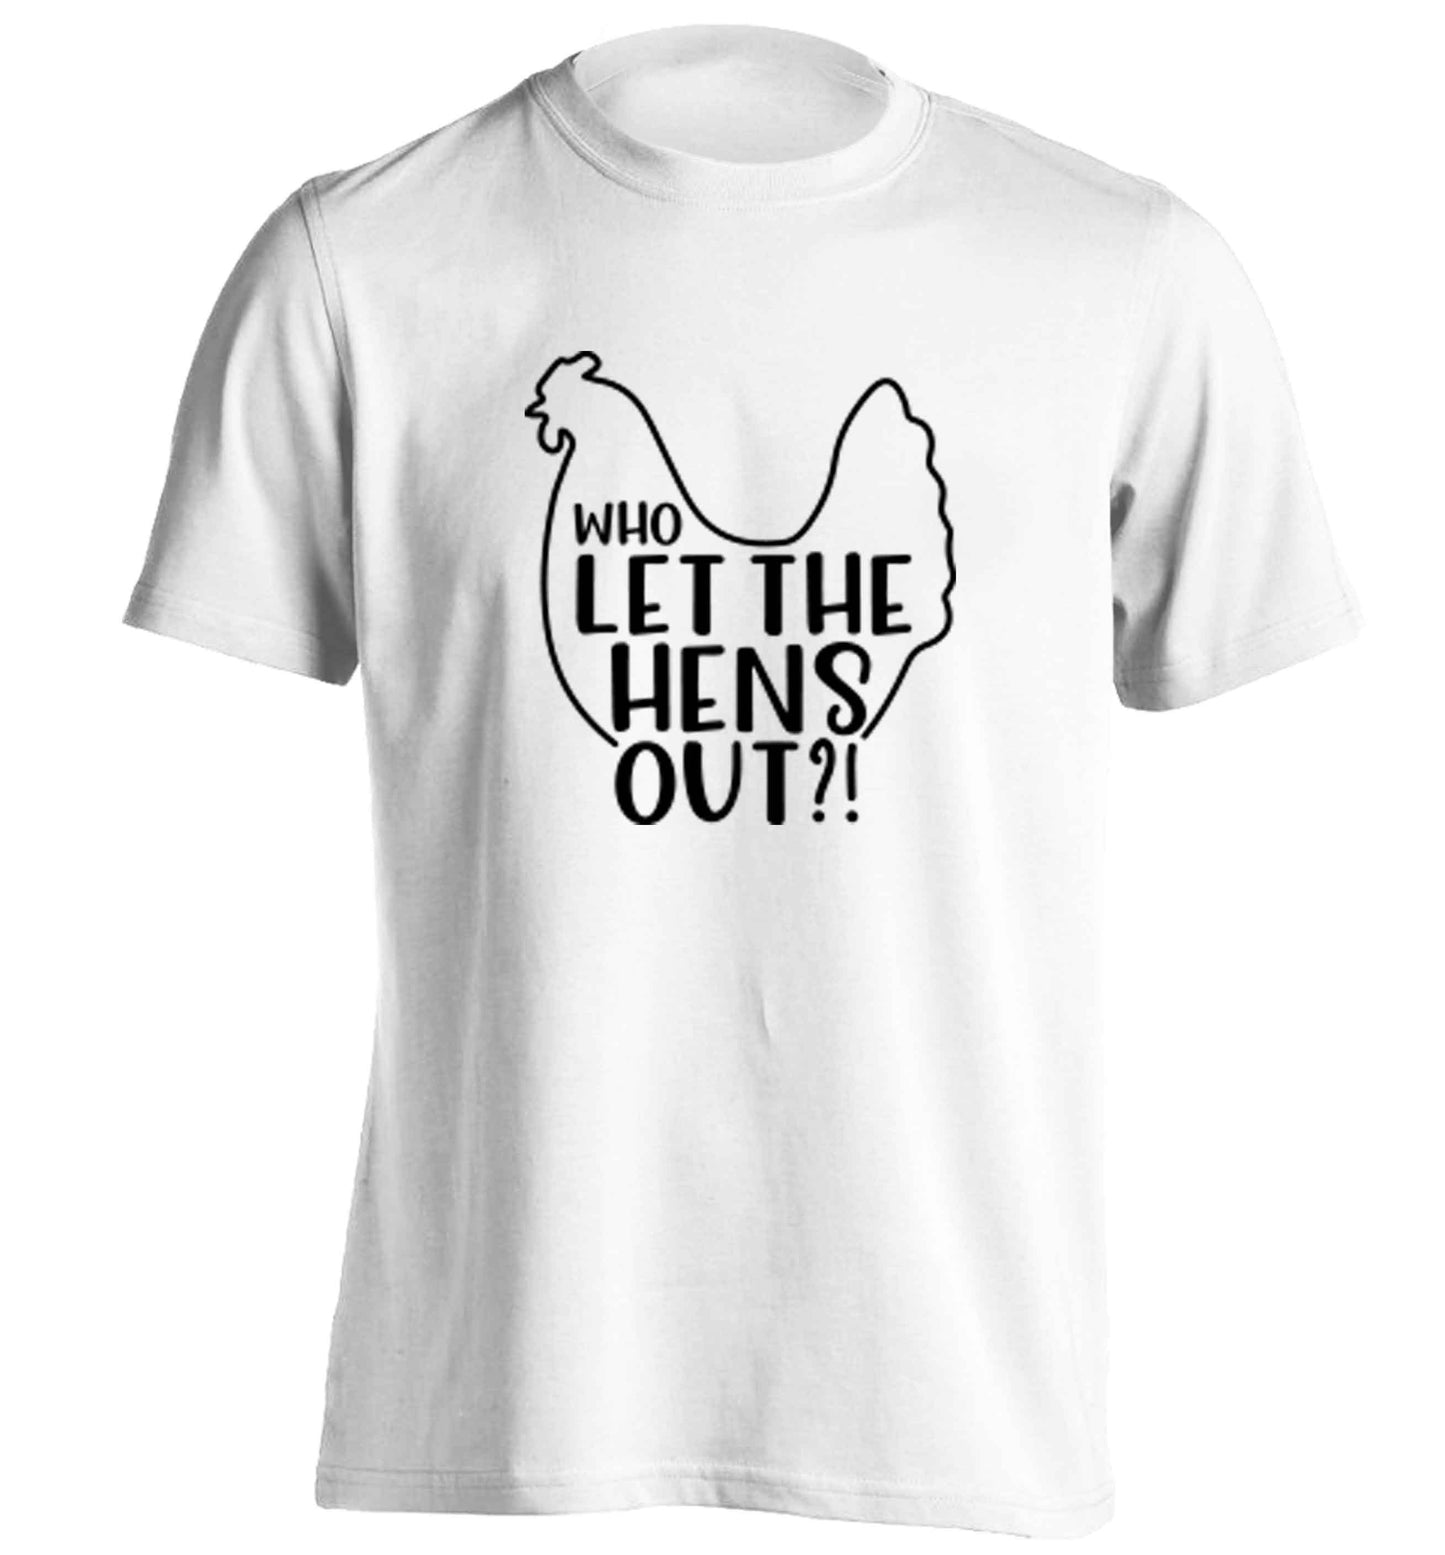 Who let the hens out adults unisex white Tshirt 2XL